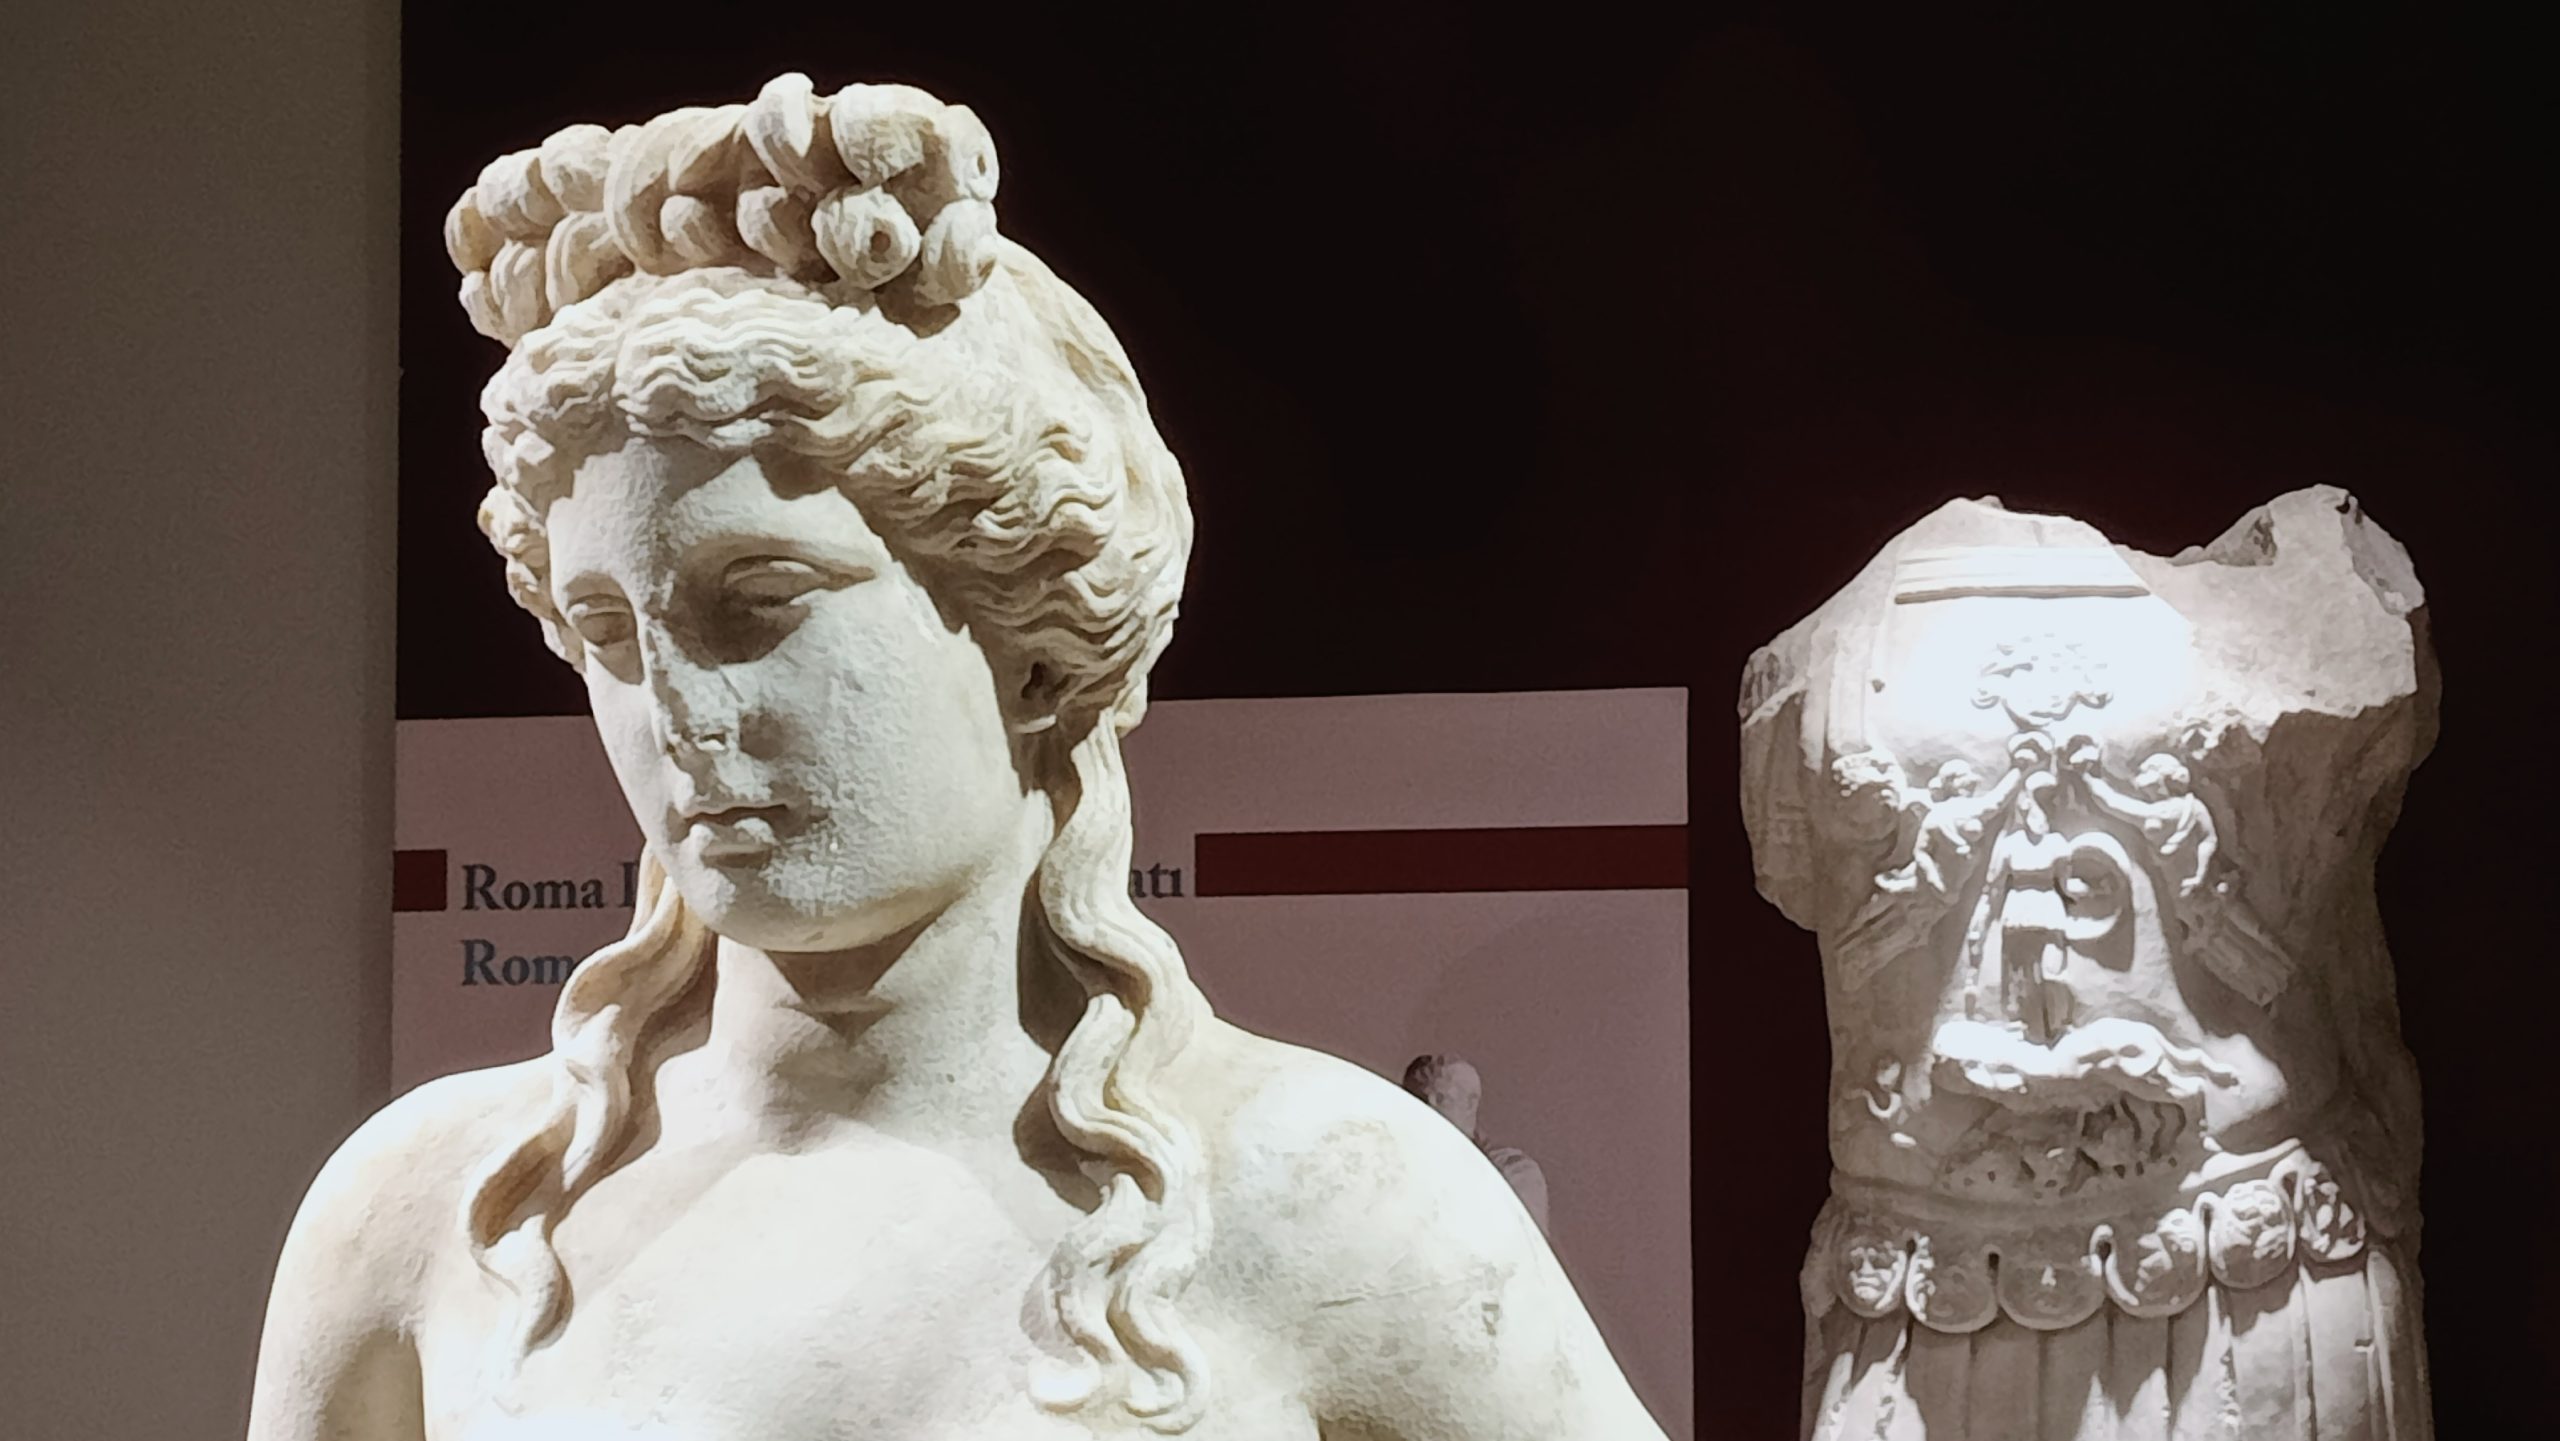 It turned out that the water nymph statue unearthed in Bartın was Aphrodite